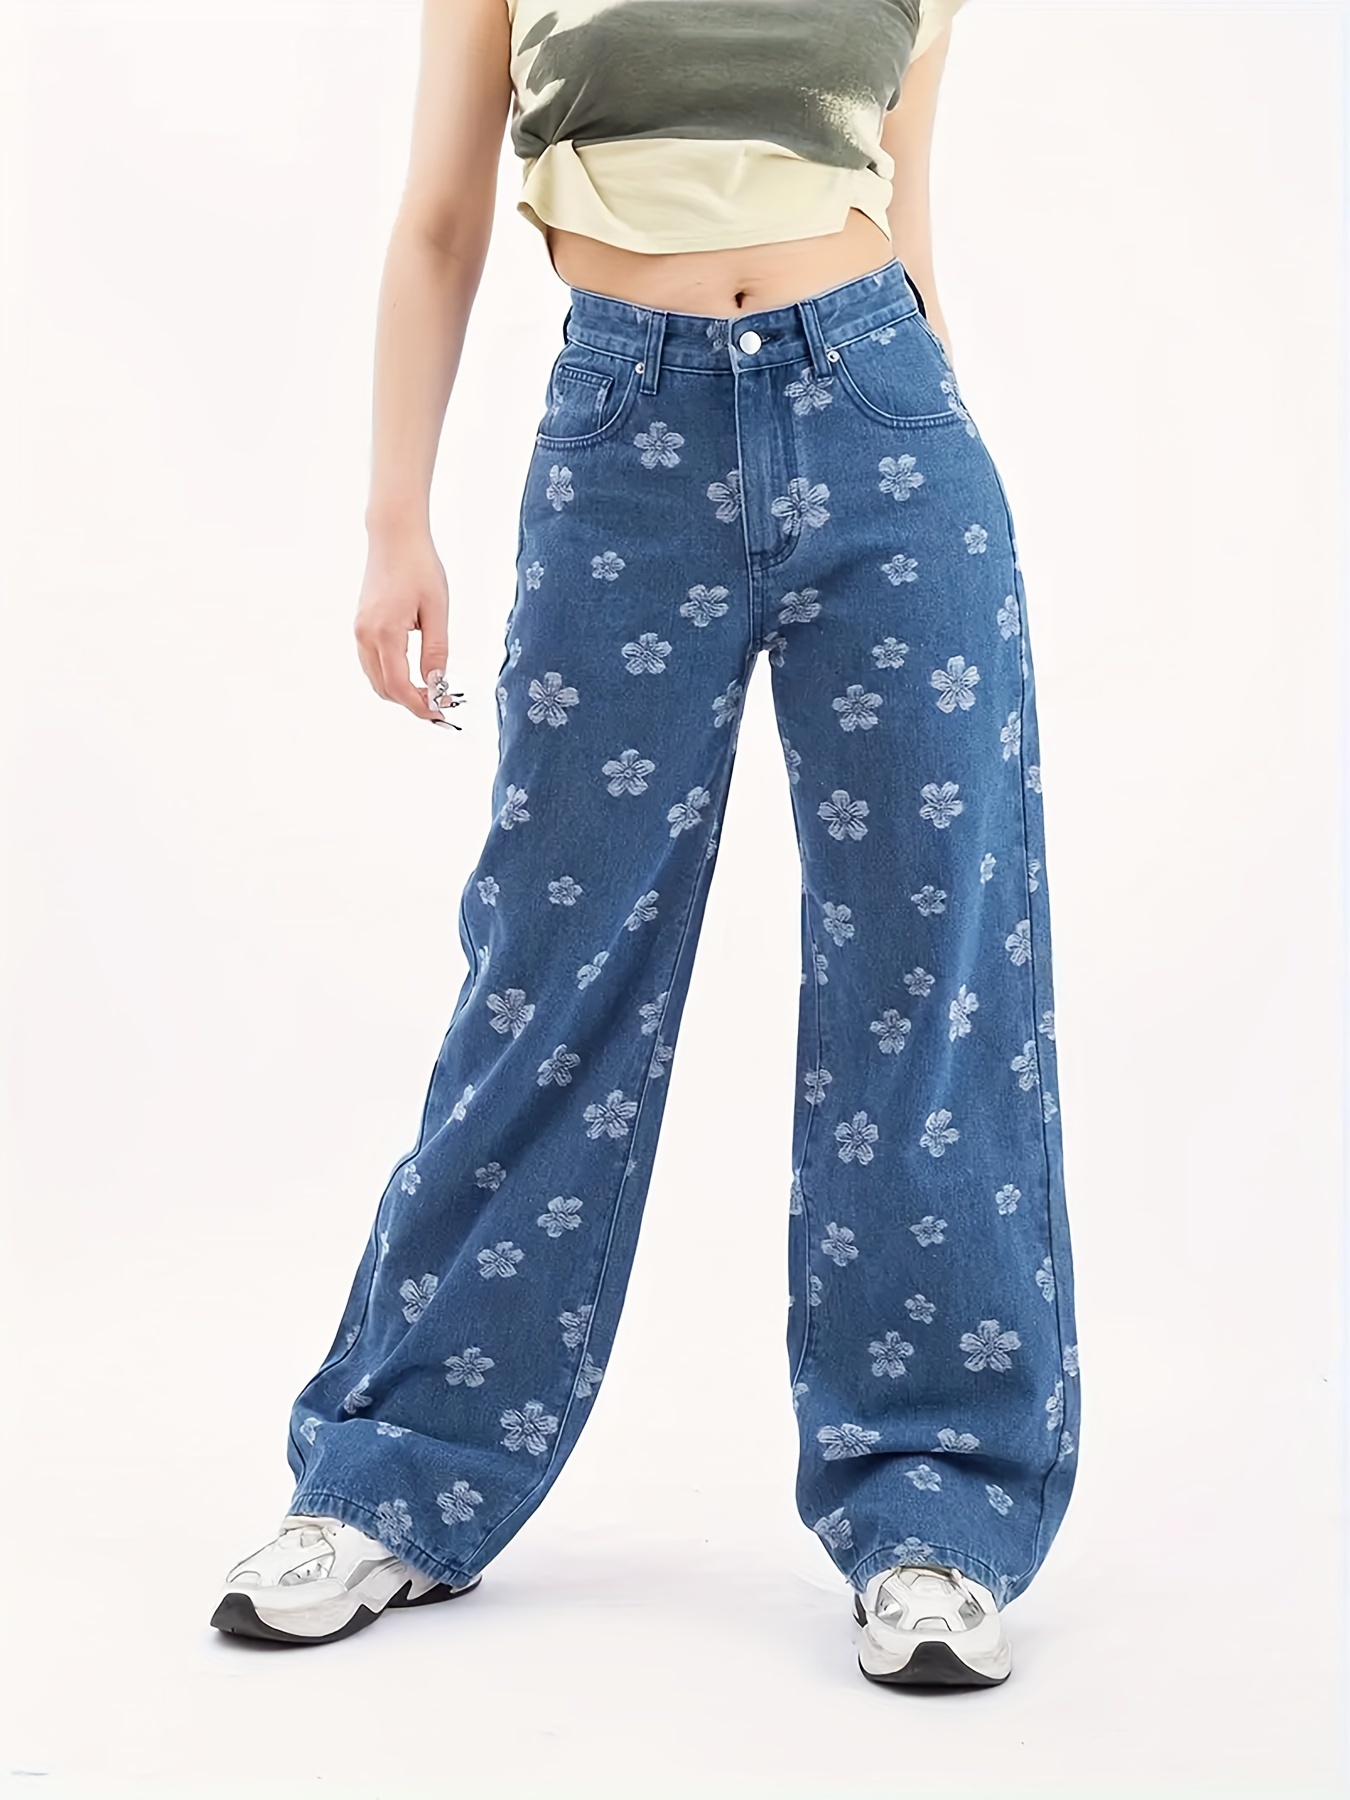 Fitted Pyjama Pants with Pockets - Ditsy blue floral